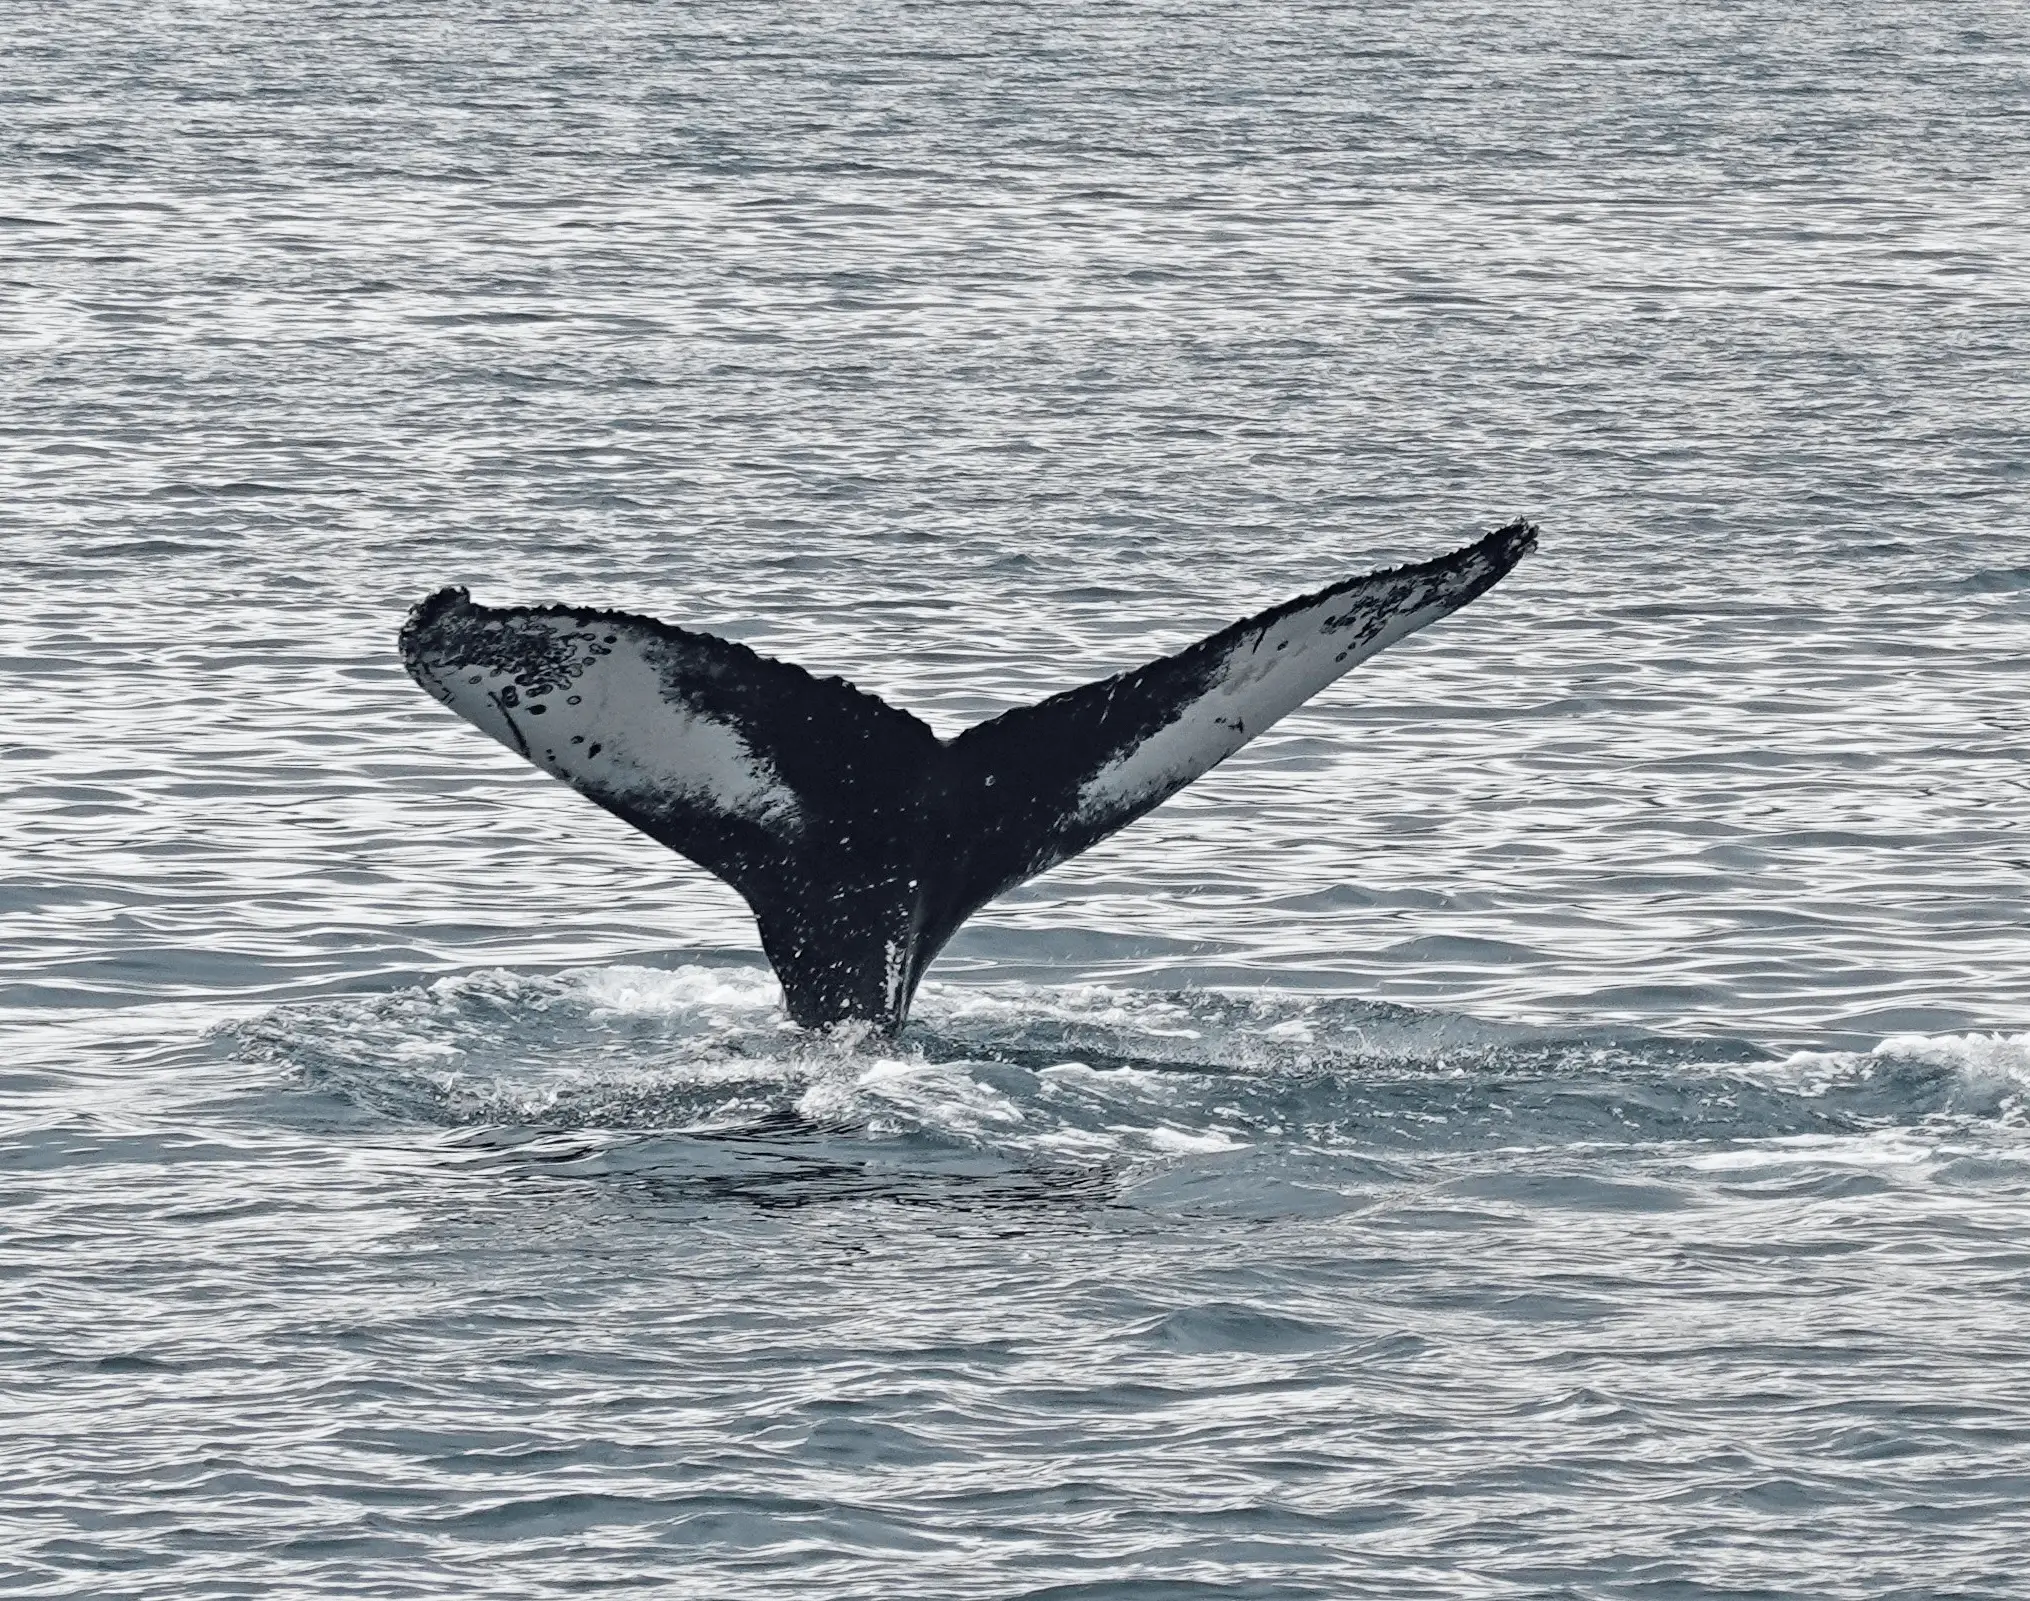 Humpback whale tale cresting in the ocean